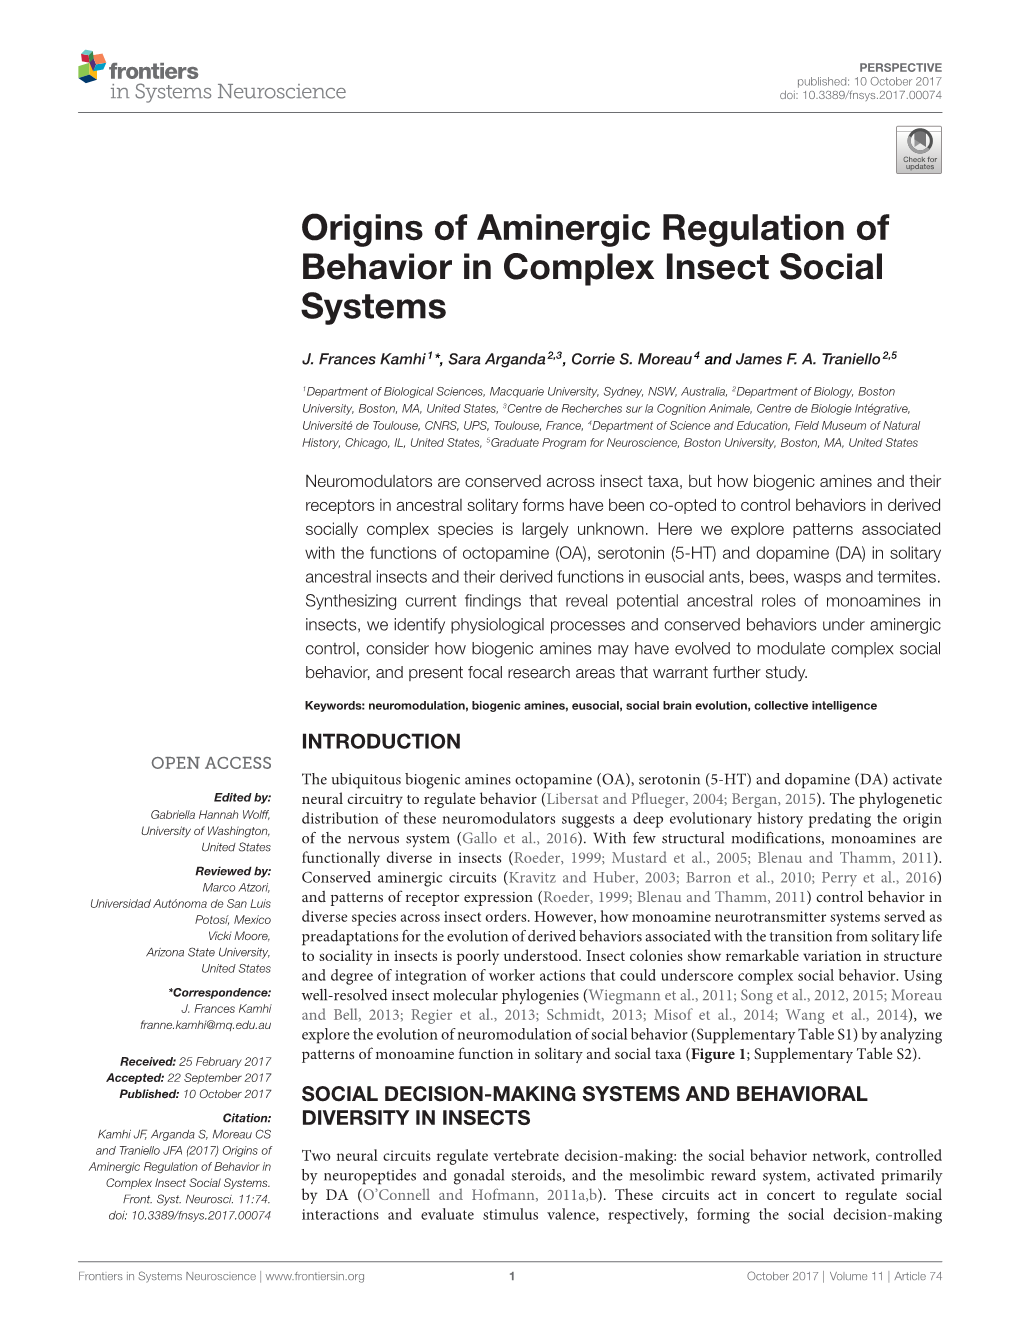 Origins of Aminergic Regulation of Behavior in Complex Insect Social Systems